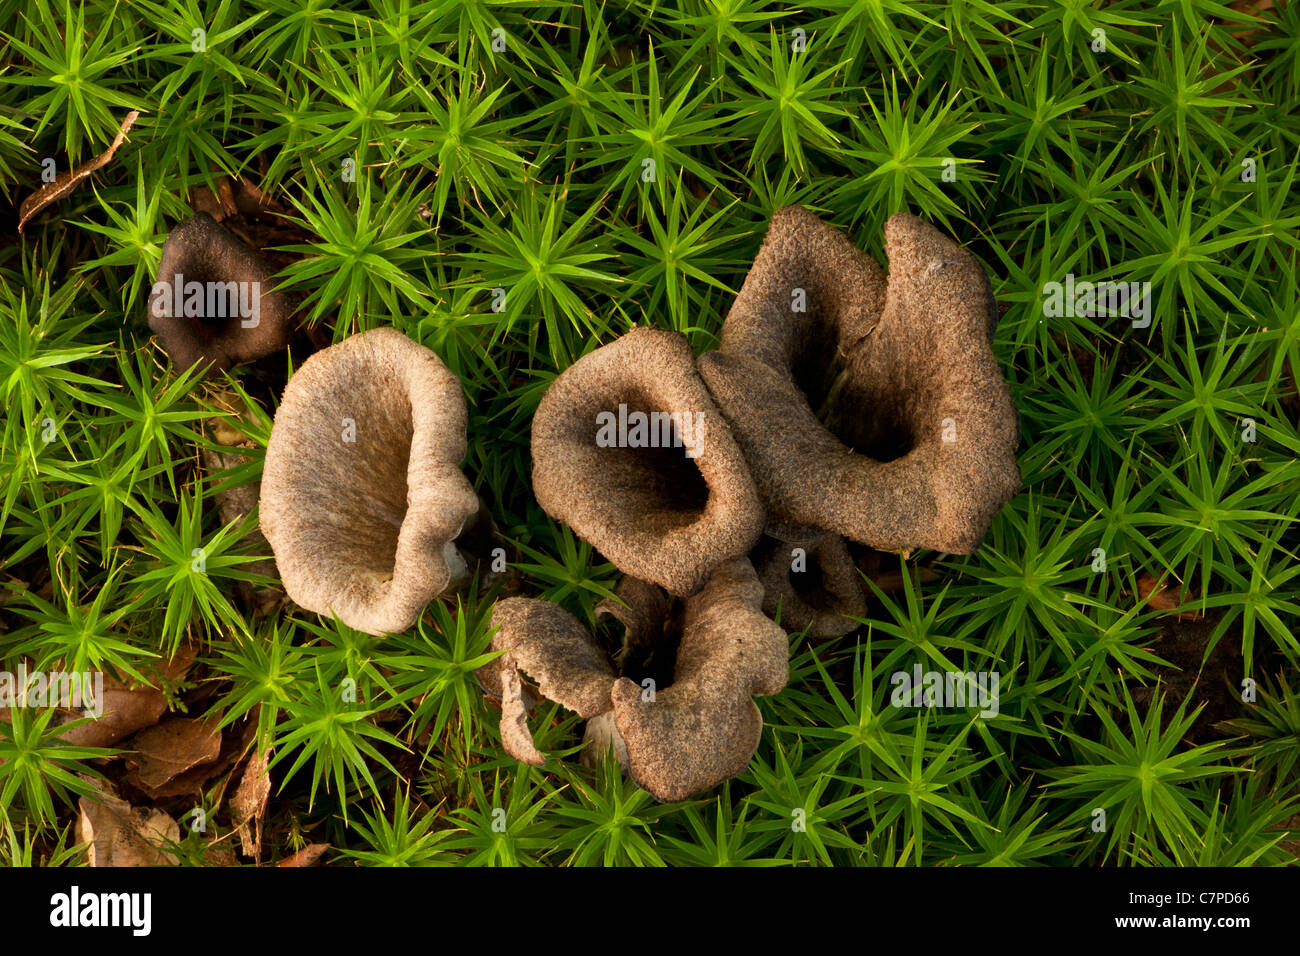 Horn of Plenty fungus, Craterellus cornucopioides among woodland leaf litter and moss. Edible. New Forest, Hants Stock Photo